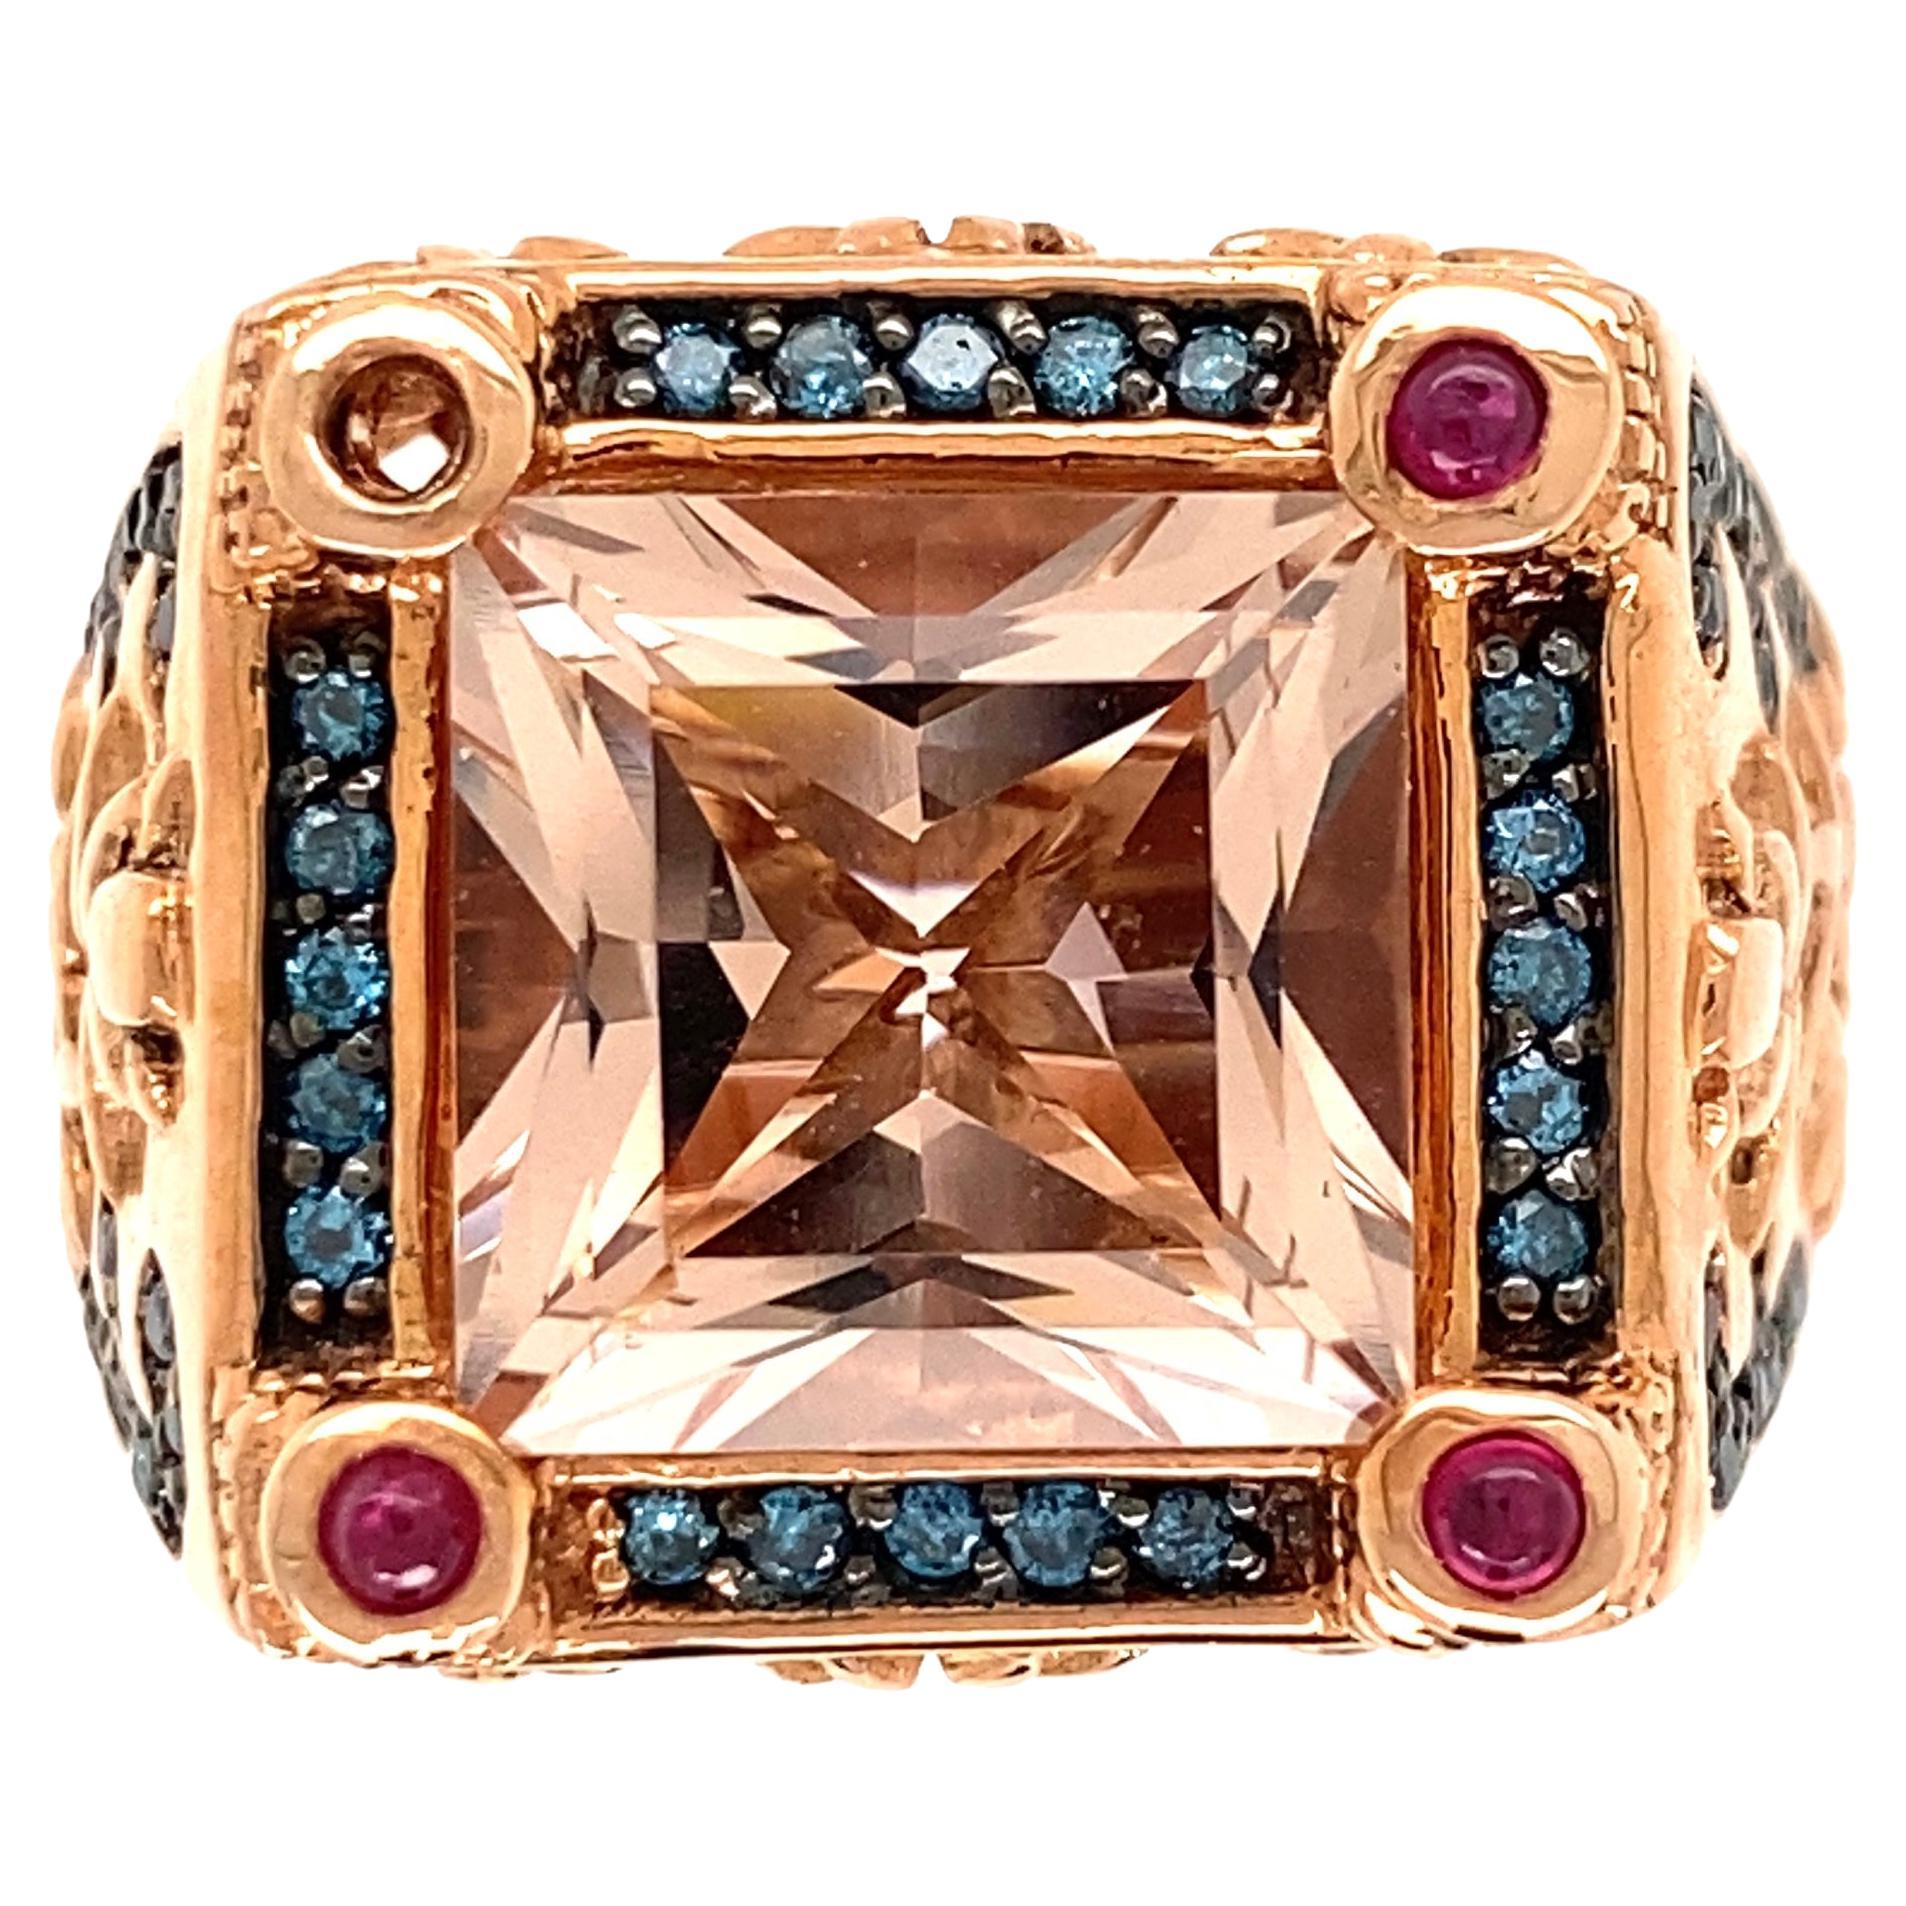 5 Carat Morganite Blue Diamond and Ruby Rose Gold Ring Estate Fine Jewelry For Sale